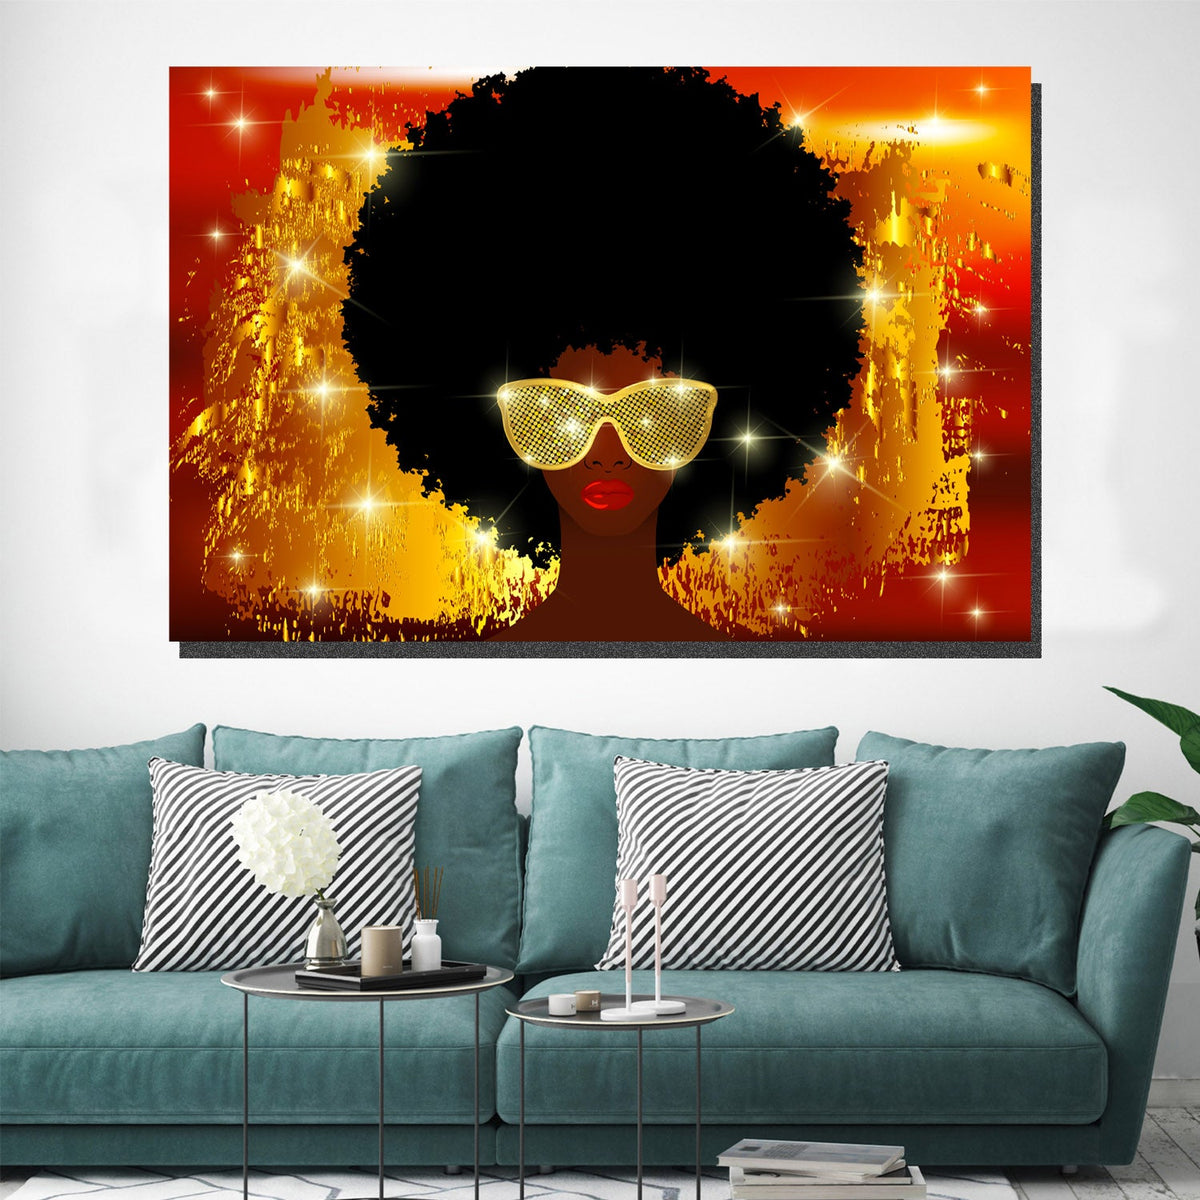 https://cdn.shopify.com/s/files/1/0387/9986/8044/products/GlamorousAfricanWomanCanvasArtprintStretched-2.jpg